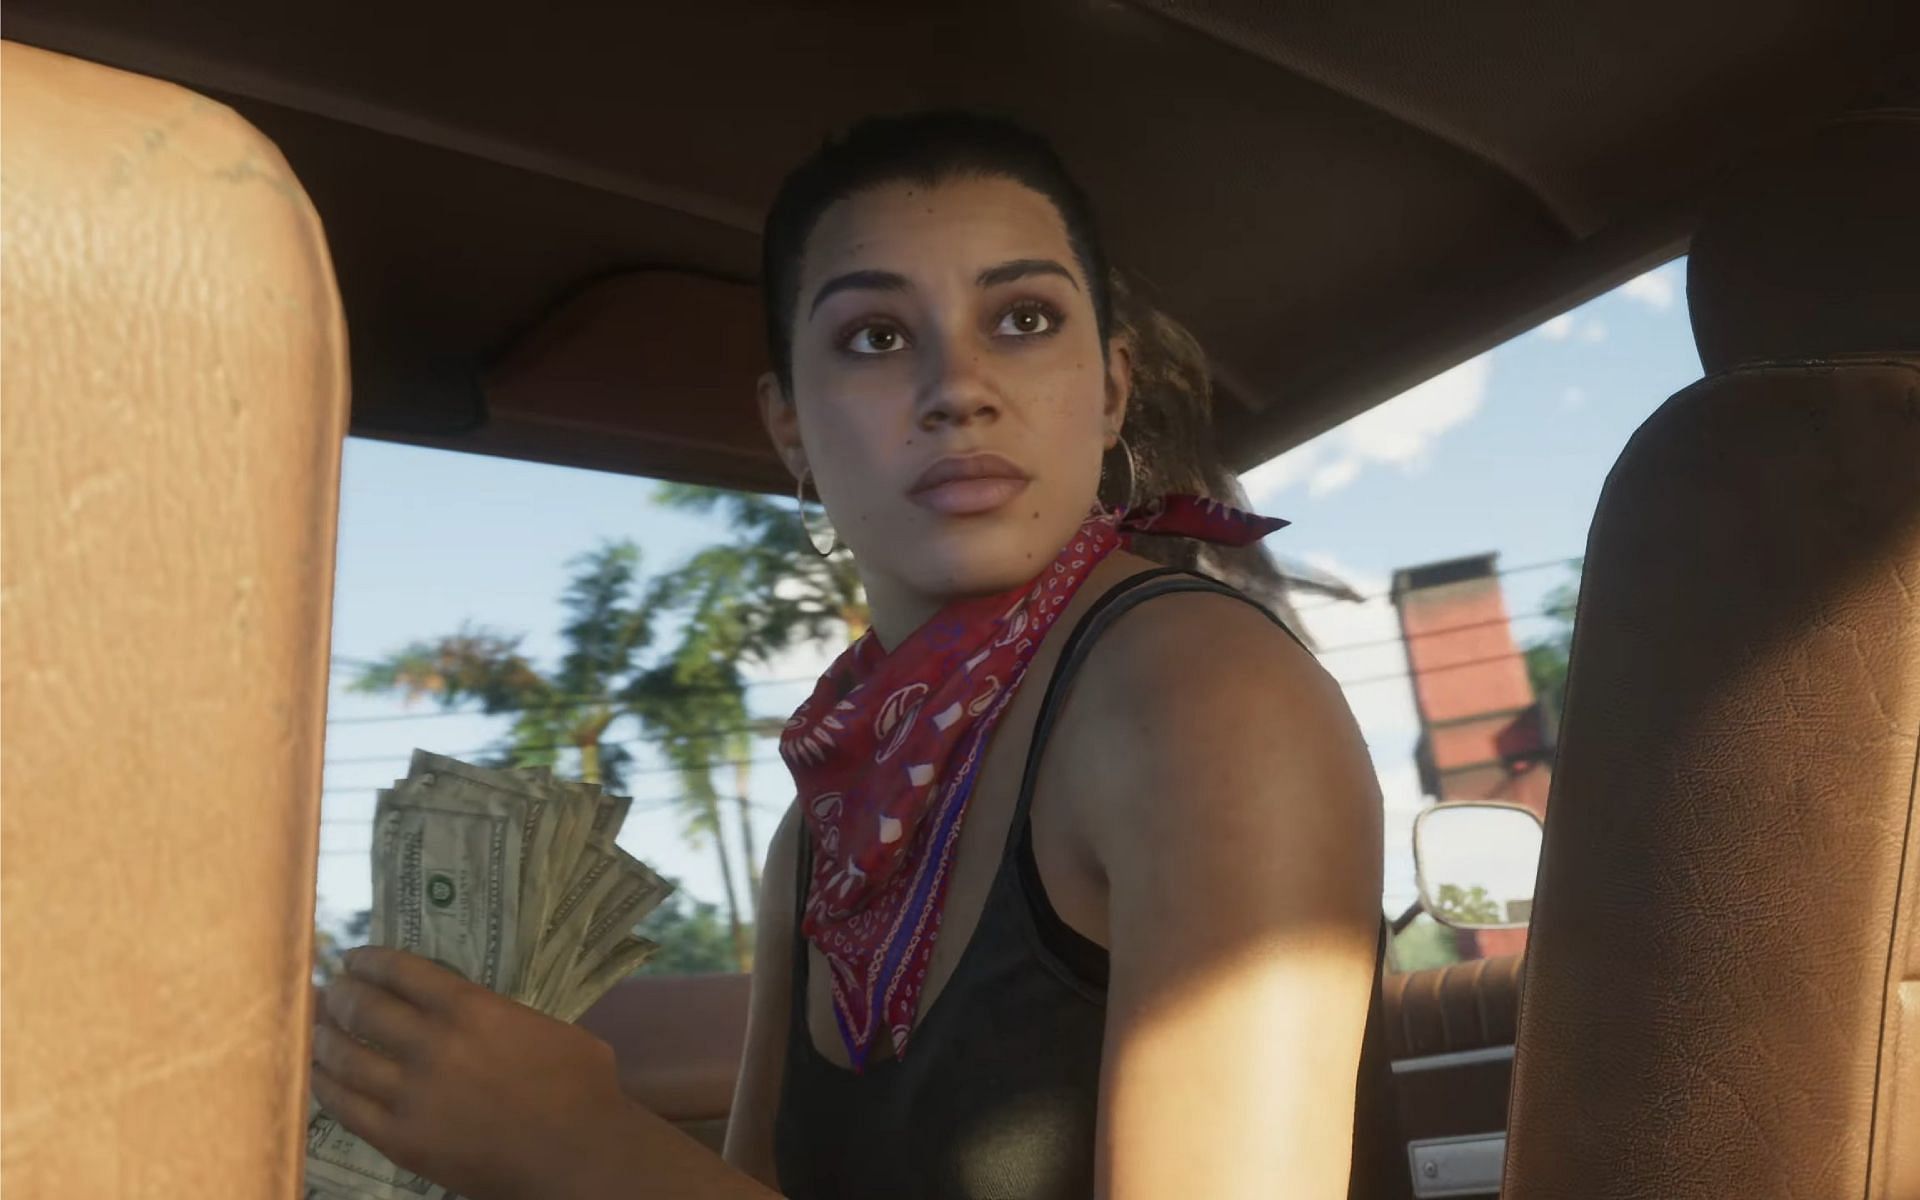 GTA 6 protagonist Lucia rumored to be transgender, fans speculate Franklin